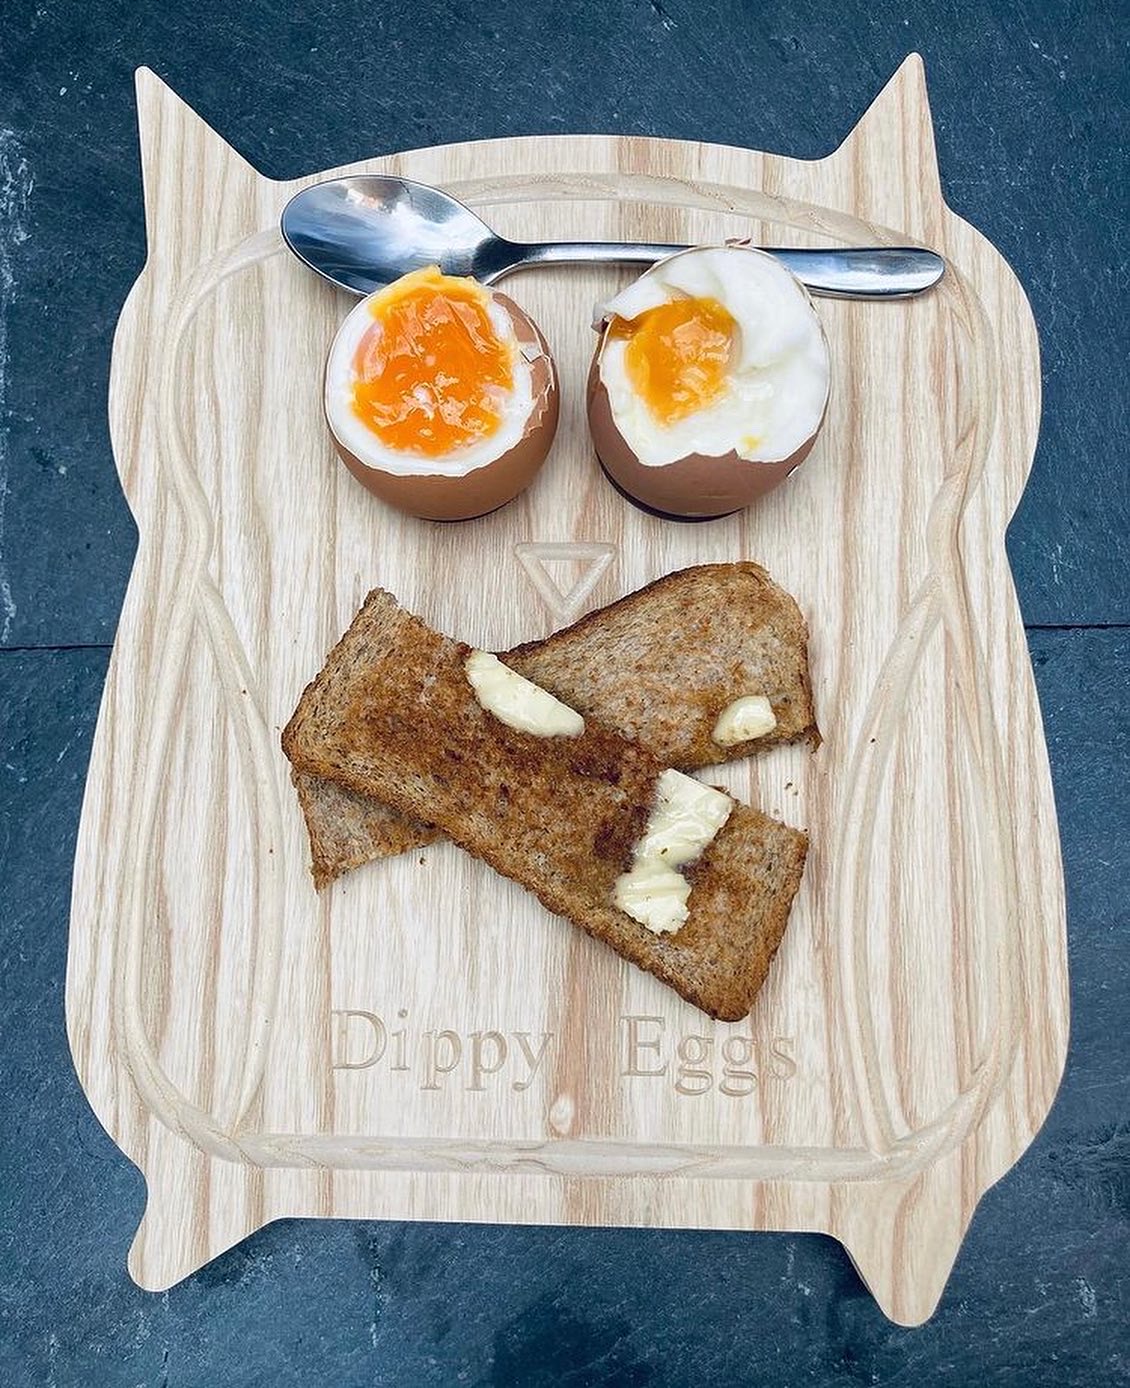 Spruce York personalised Dippy Egg Boards